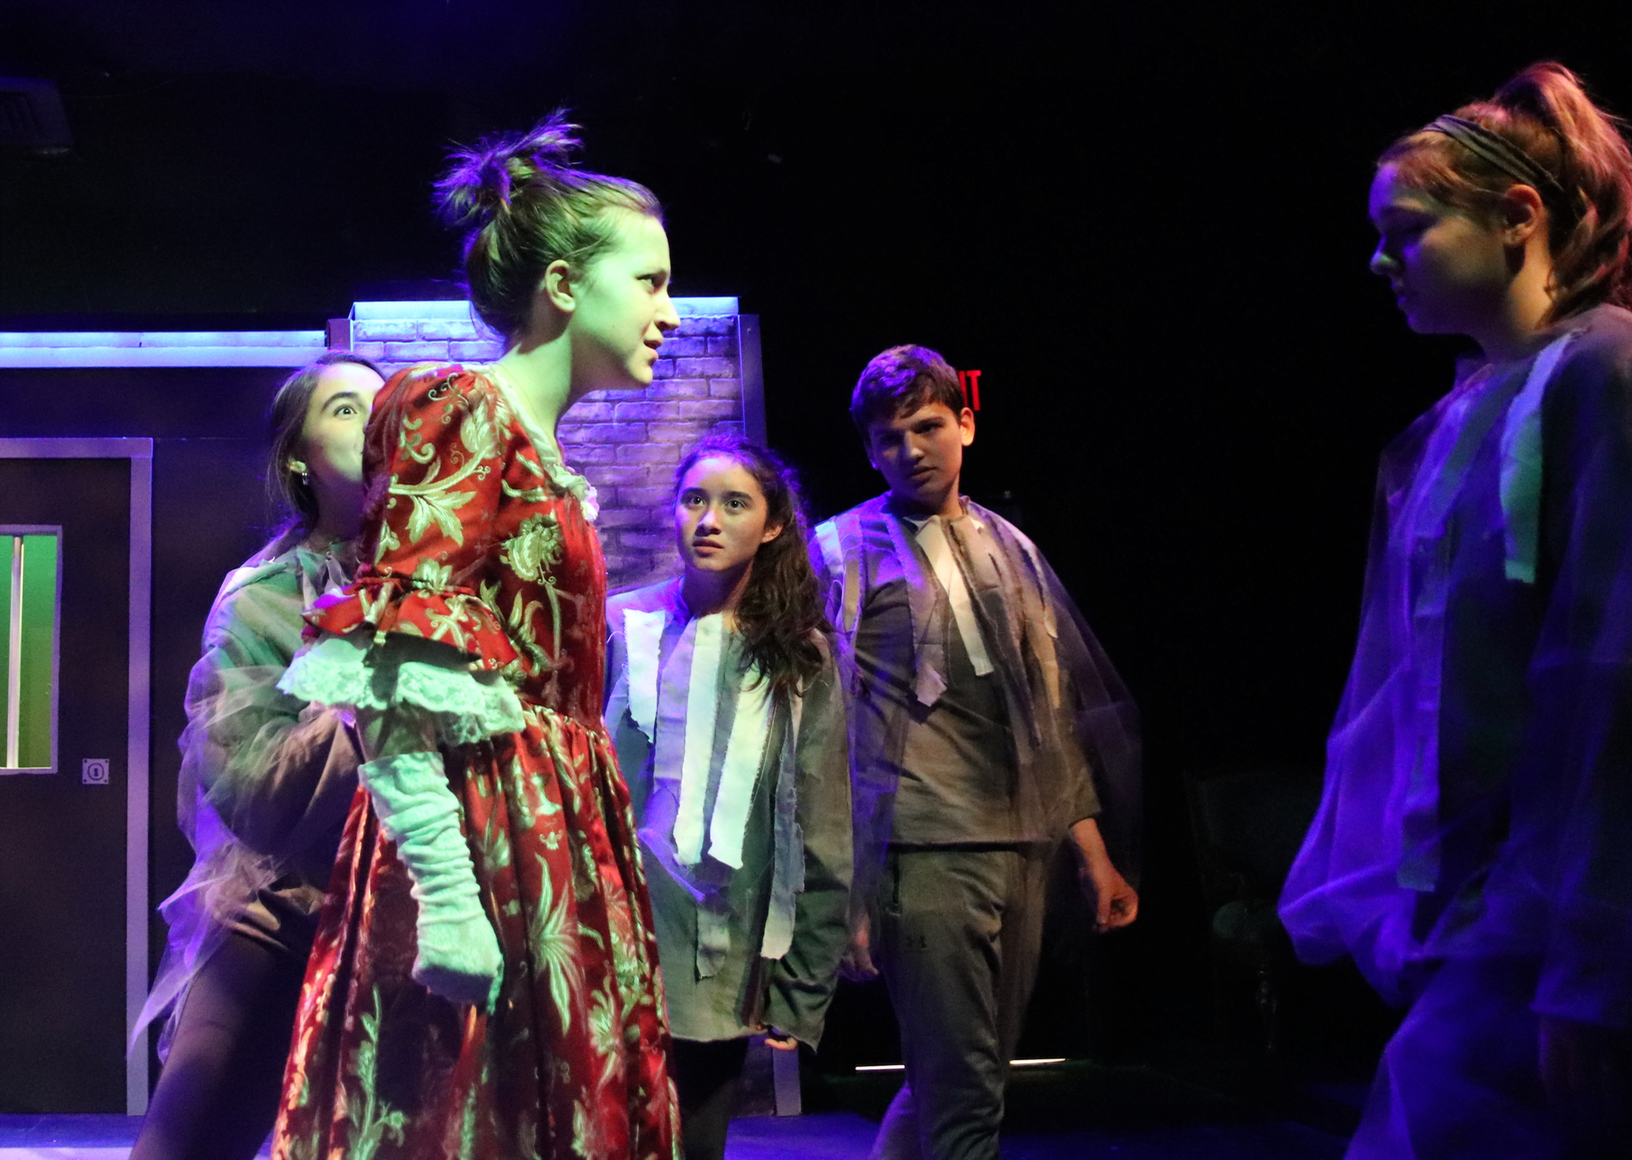      GHS theater arts students rehearse for the winter plays in the black box theater: "The Insanity of Mary Girard”and "Apollo". Feb 20, 2020 Photo: Leslie Yager